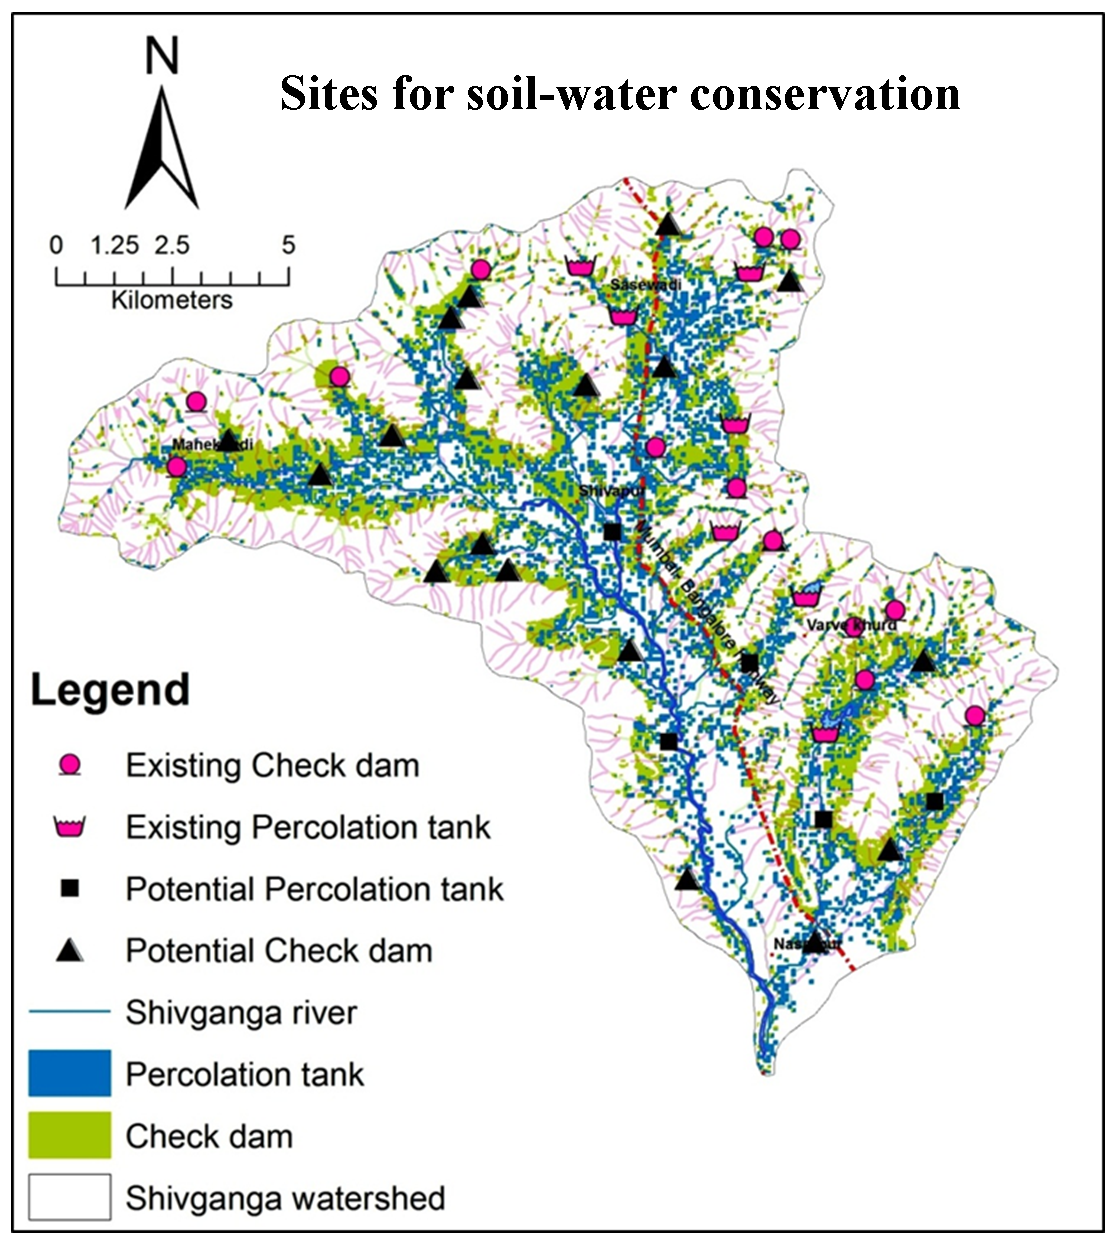 Identifying Possible Locations to Construct Soil-Water Conservation Structures by Using Hydro-geological and Geospatial Analysis